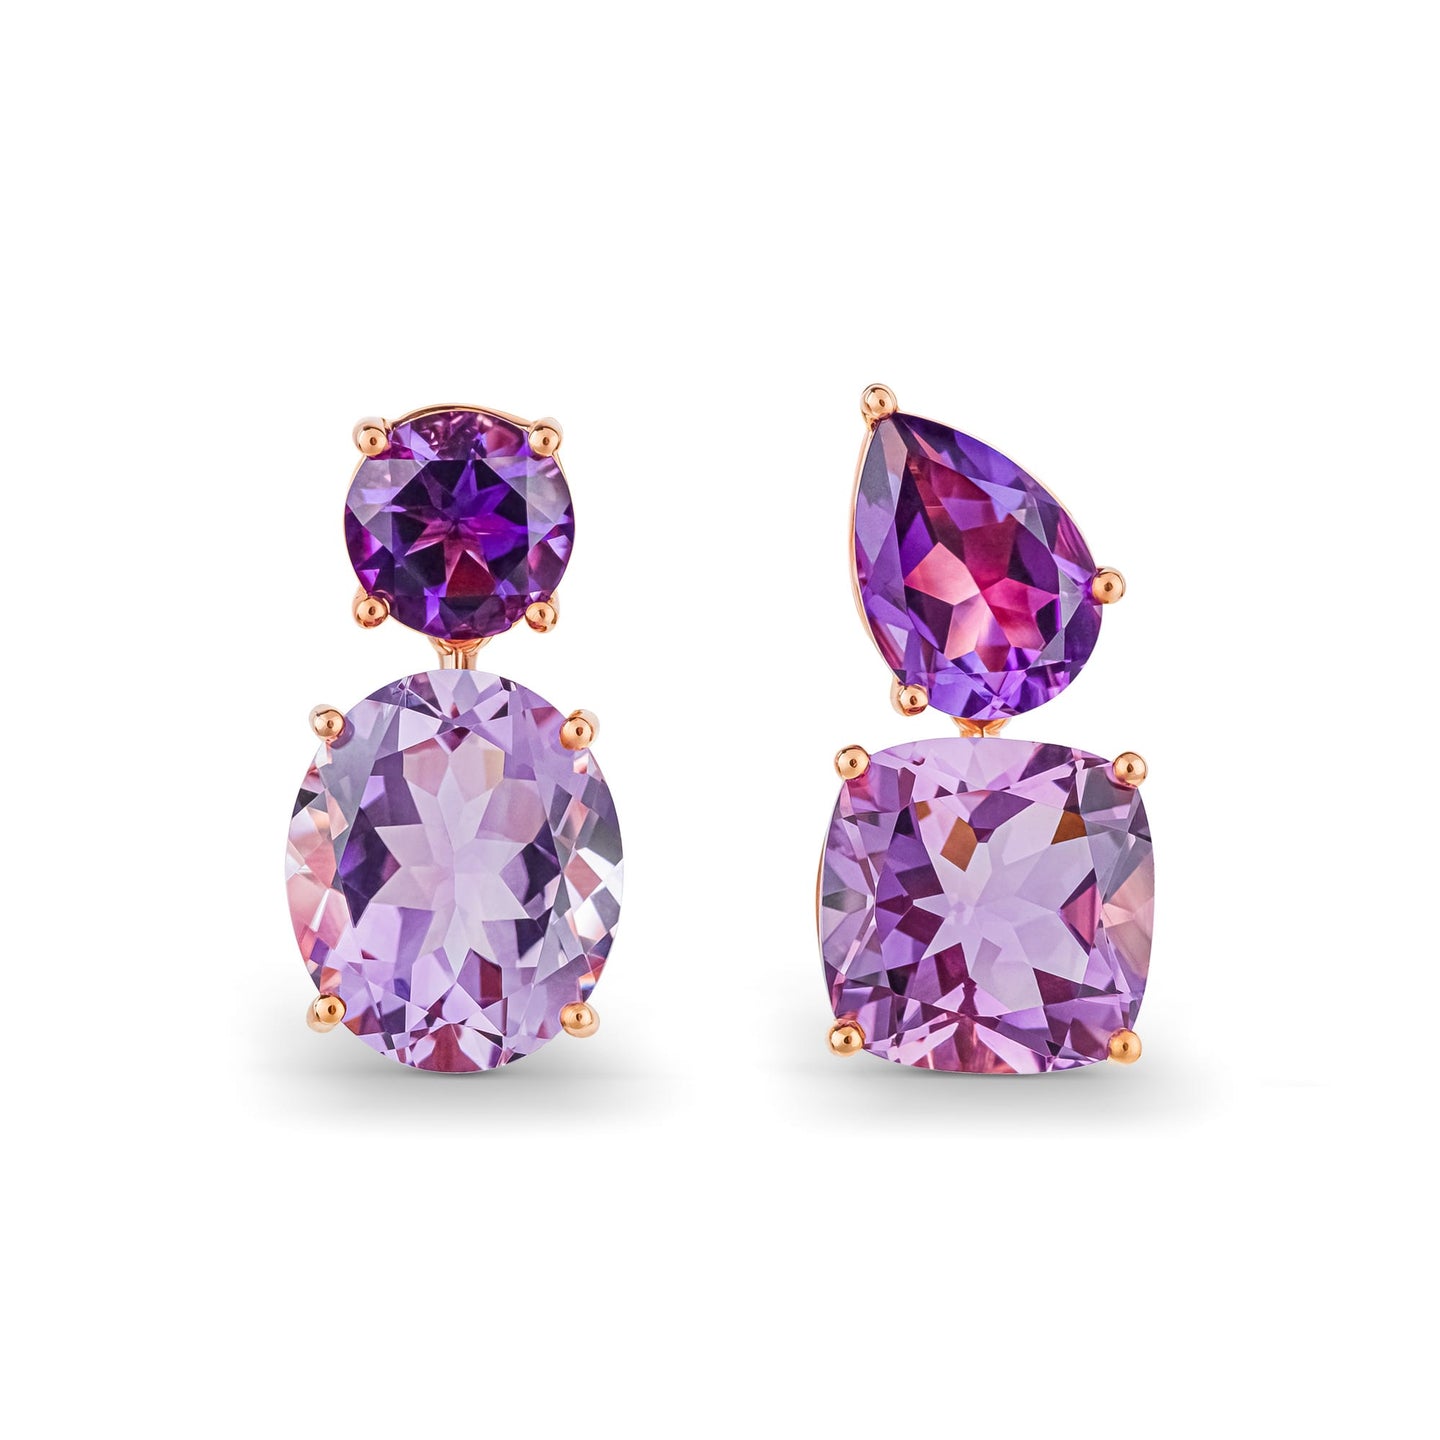 Chaos Earrings in 18ct Rose Gold with Amethyst